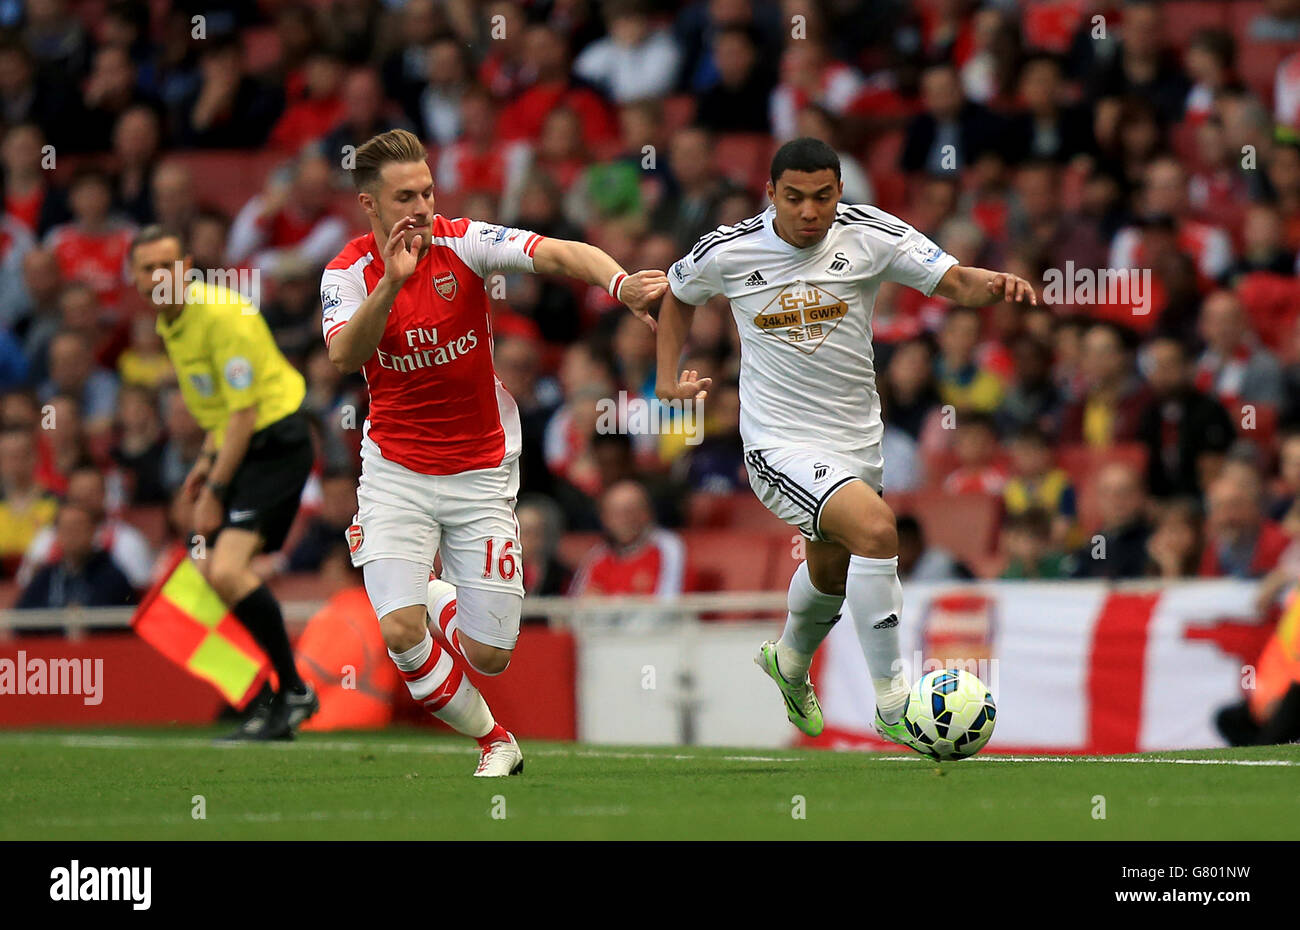 Soccer - Barclays Premier League - Arsenal v Swansea City - Emirates Stadium. Swansea City's Jefferson Montero (right) and Arsenal's Aaron Ramsey battle for the ball Stock Photo